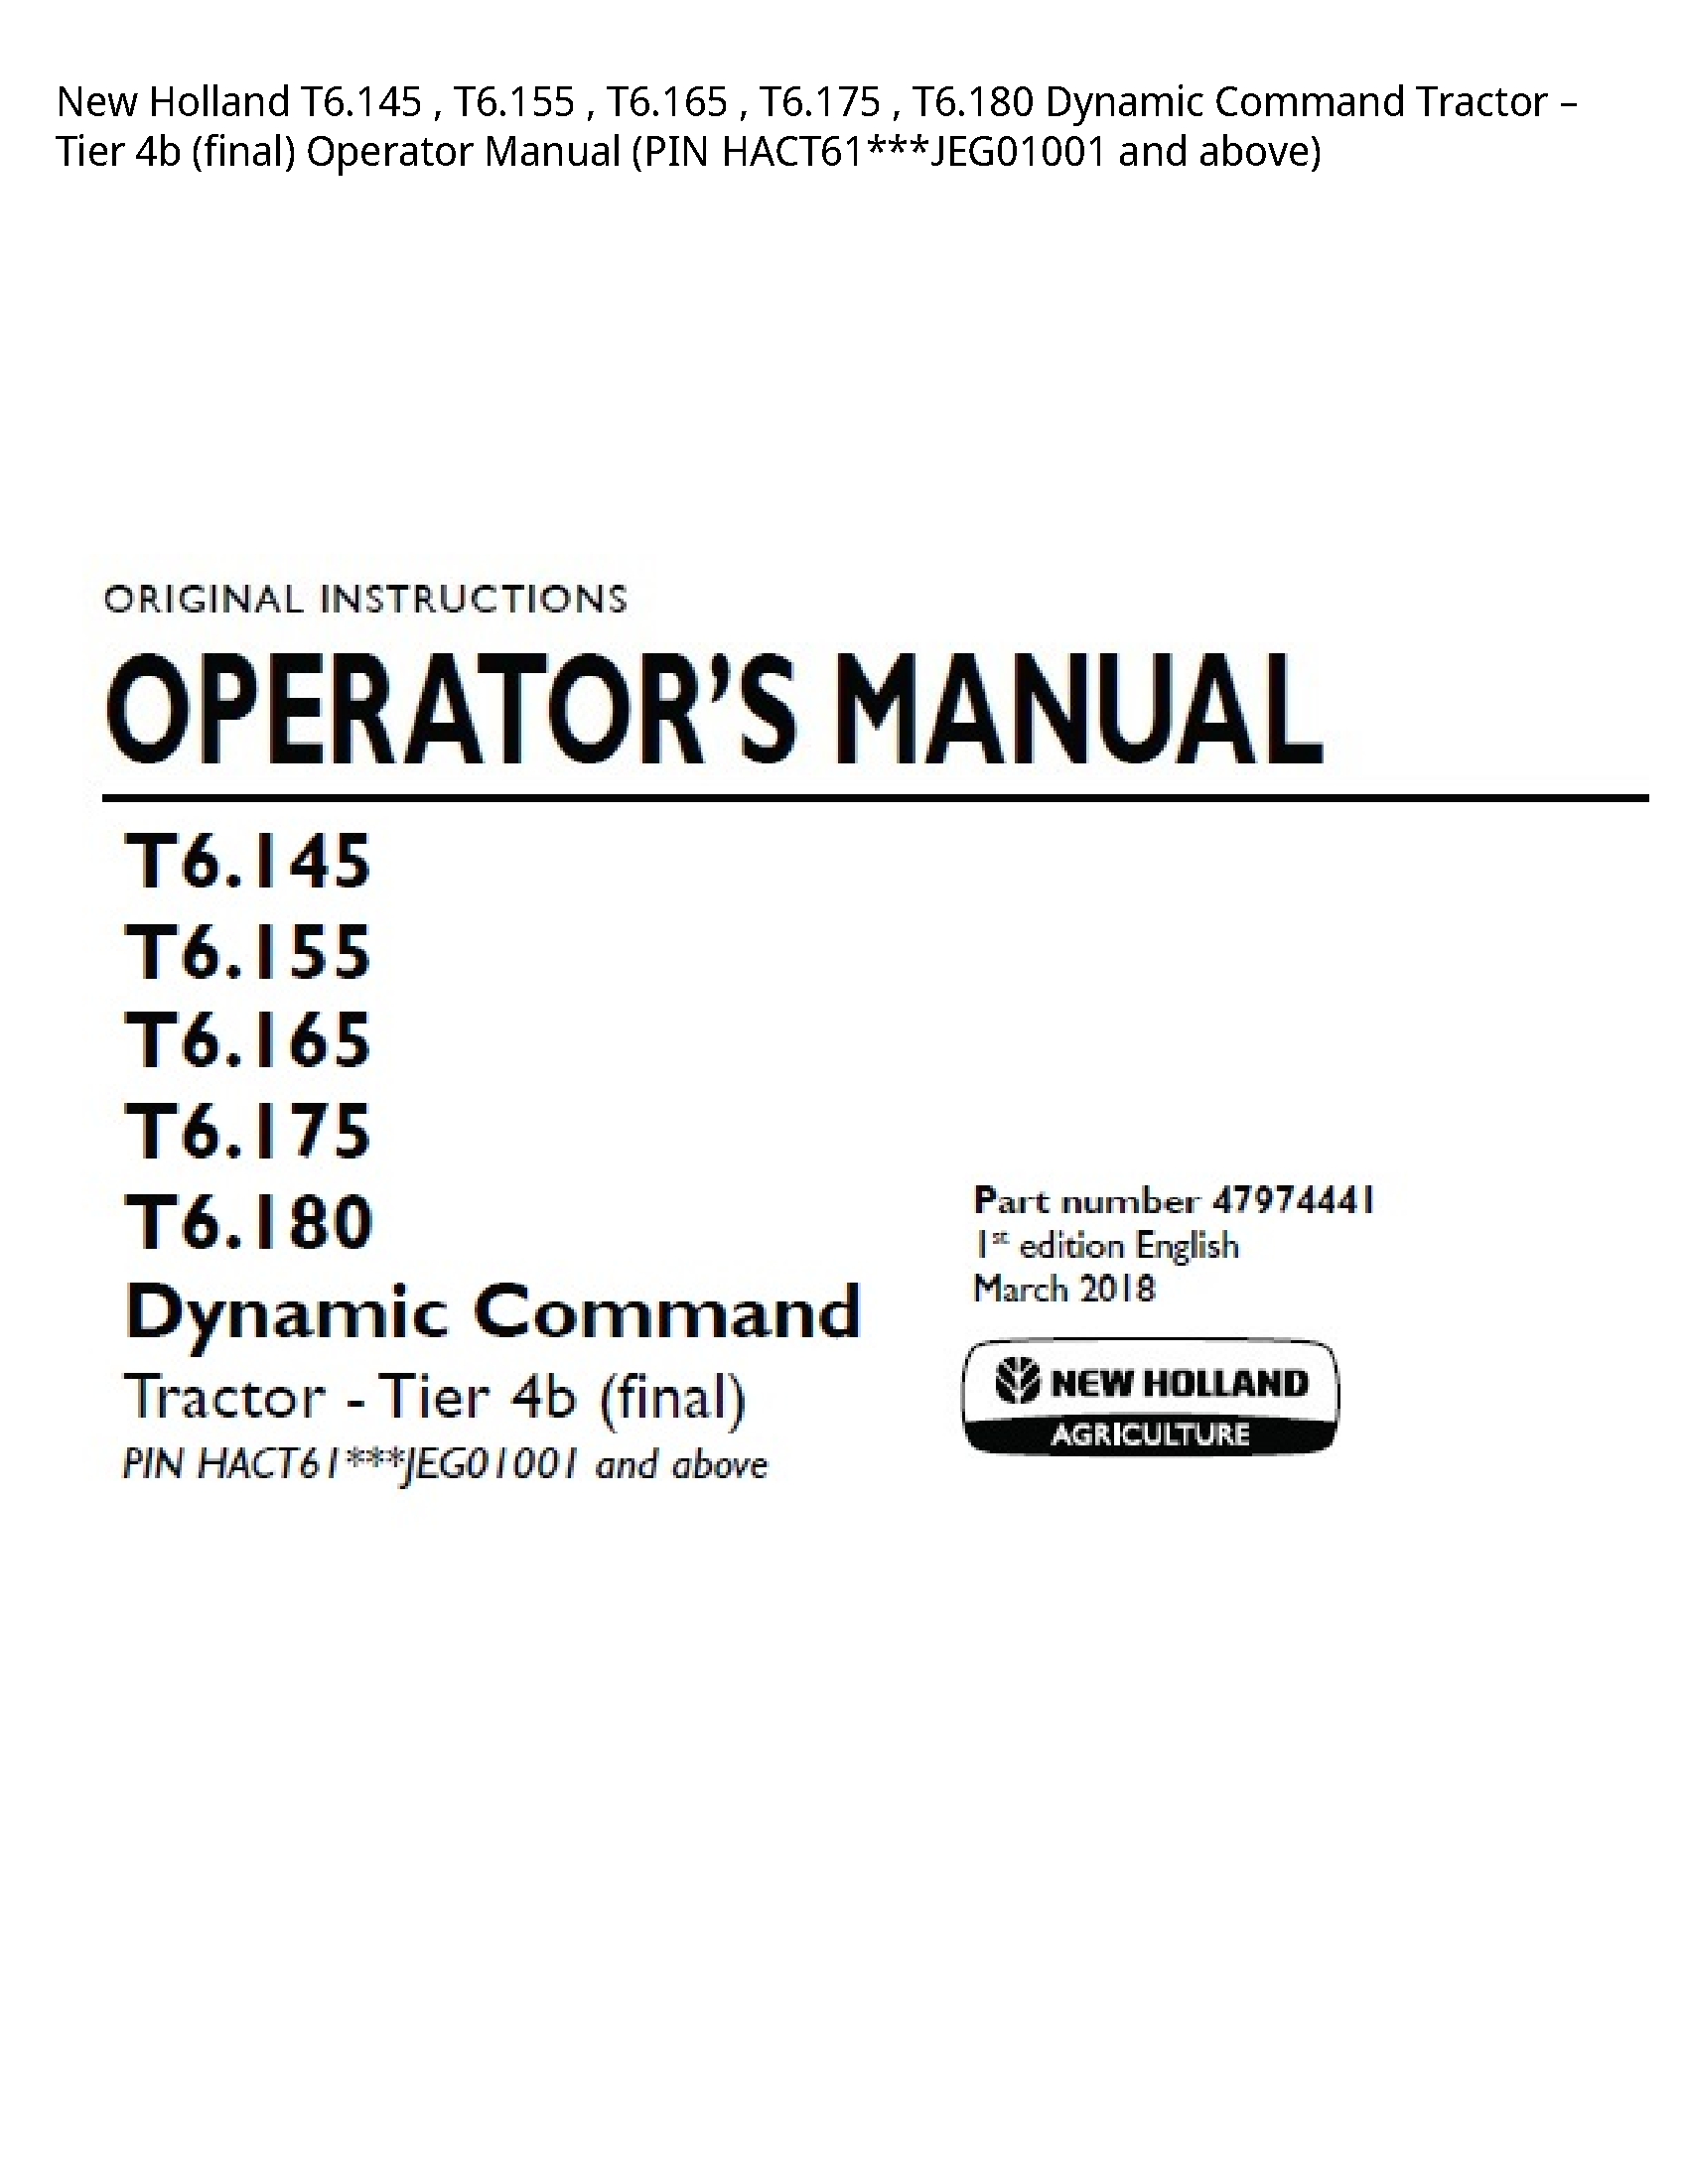 New Holland T6.145 Dynamic Command Tractor Tier (final) Operator manual